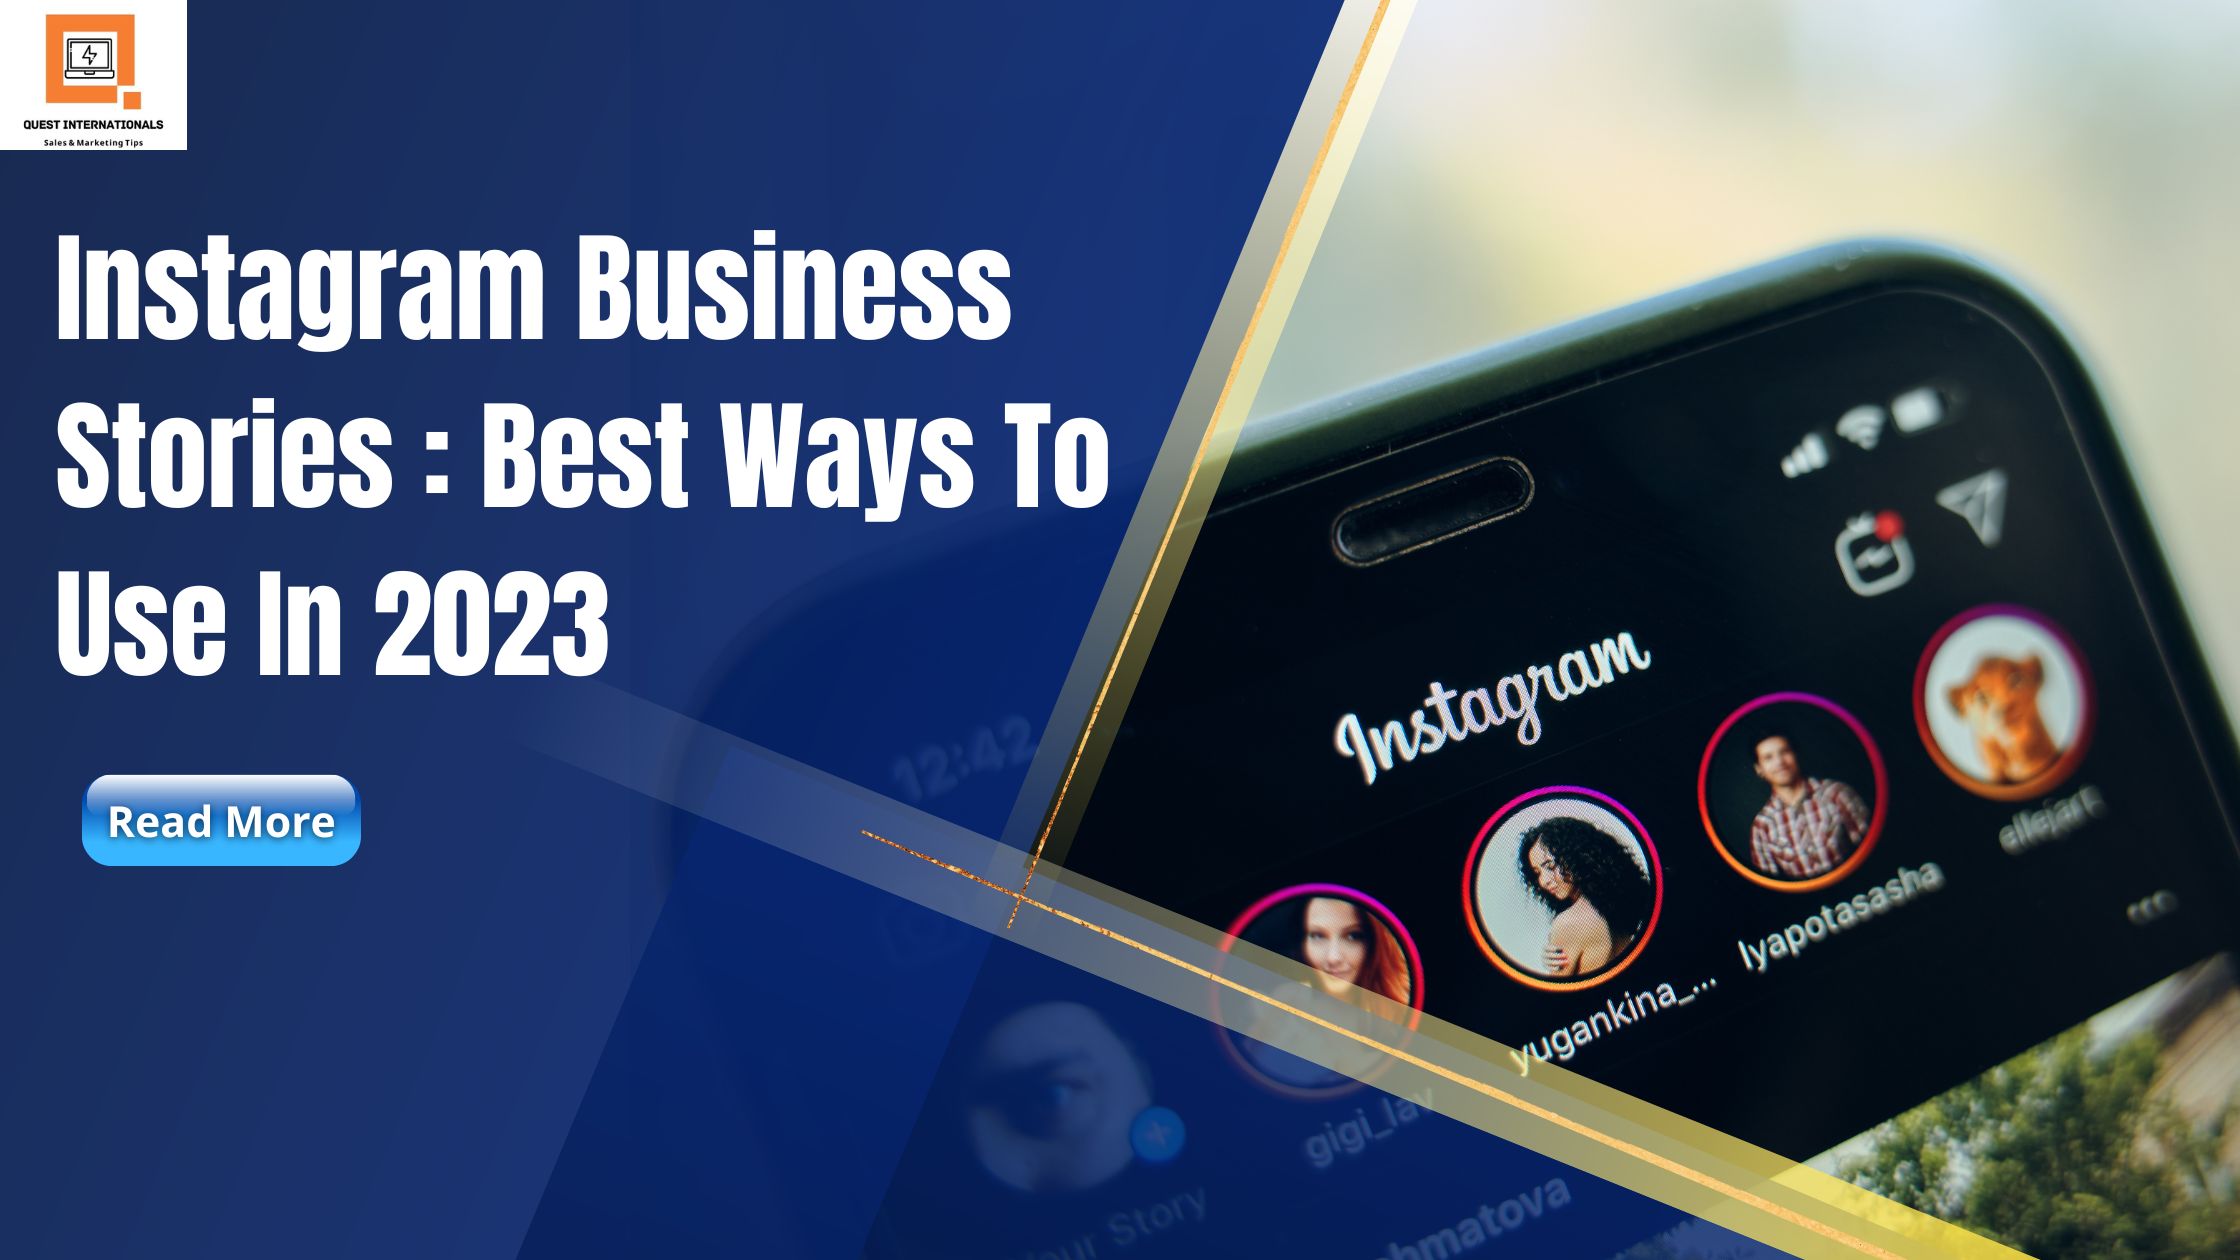 You are currently viewing Instagram Business Stories : Best Ways To Use In 2023